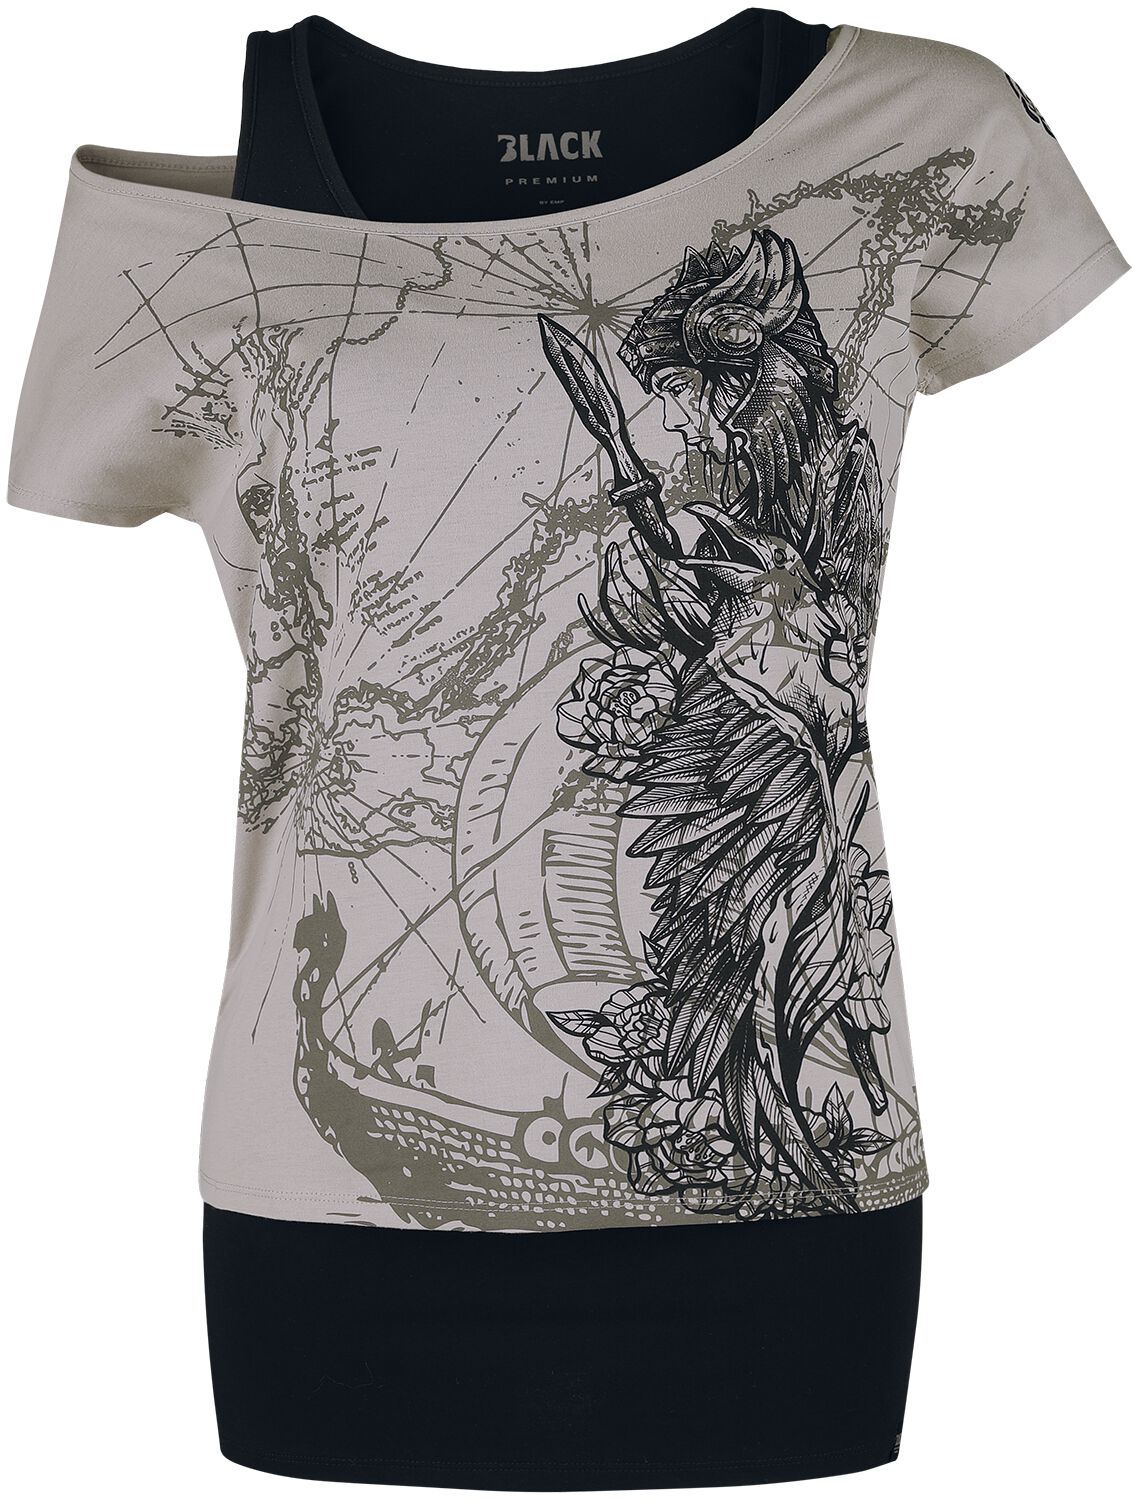 Image of T-Shirt di Black Premium by EMP - Double-Layer-T-Shirt with Detailed Front Print - S a XXL - Donna - grigio/nero